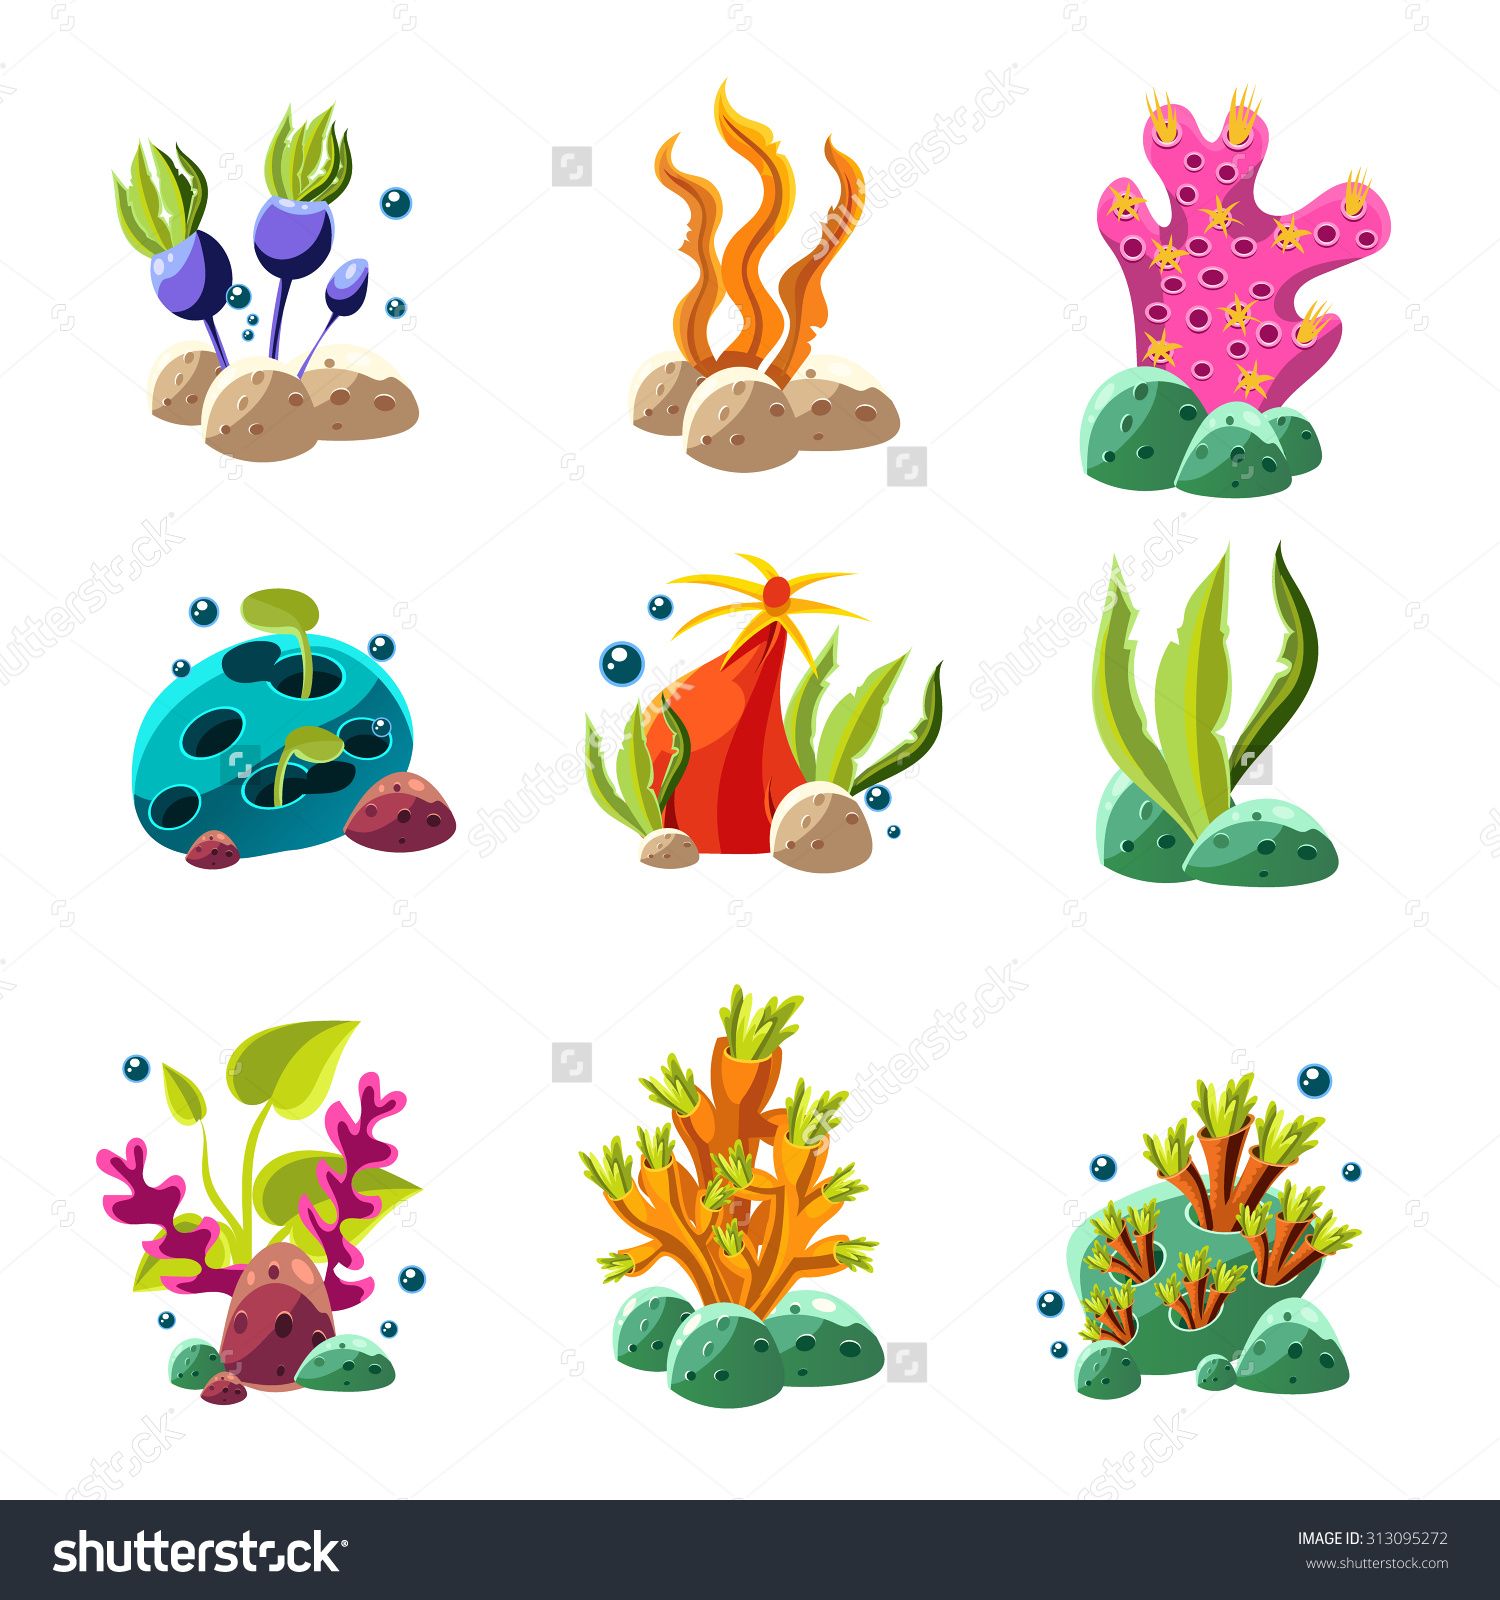 planting clipart under sea